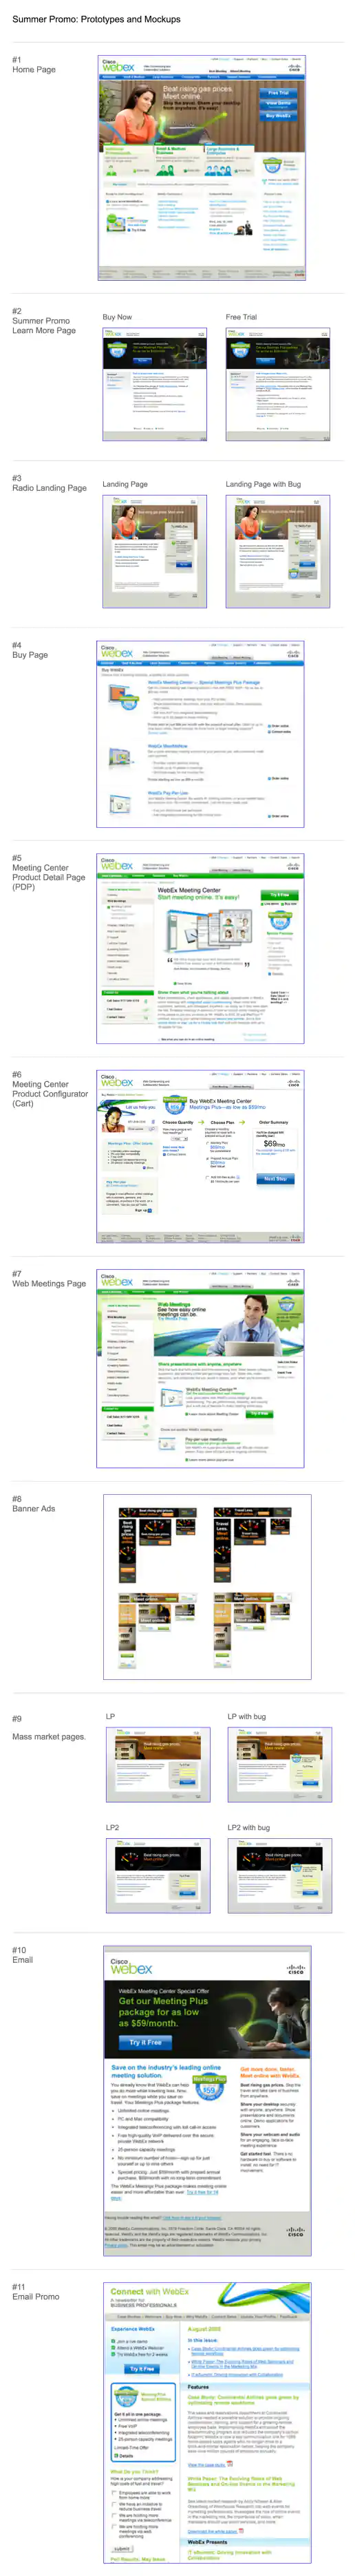 Cisco WebEx Meetings Plus Summer Campaign Prototypes and Mockups Presentation project image